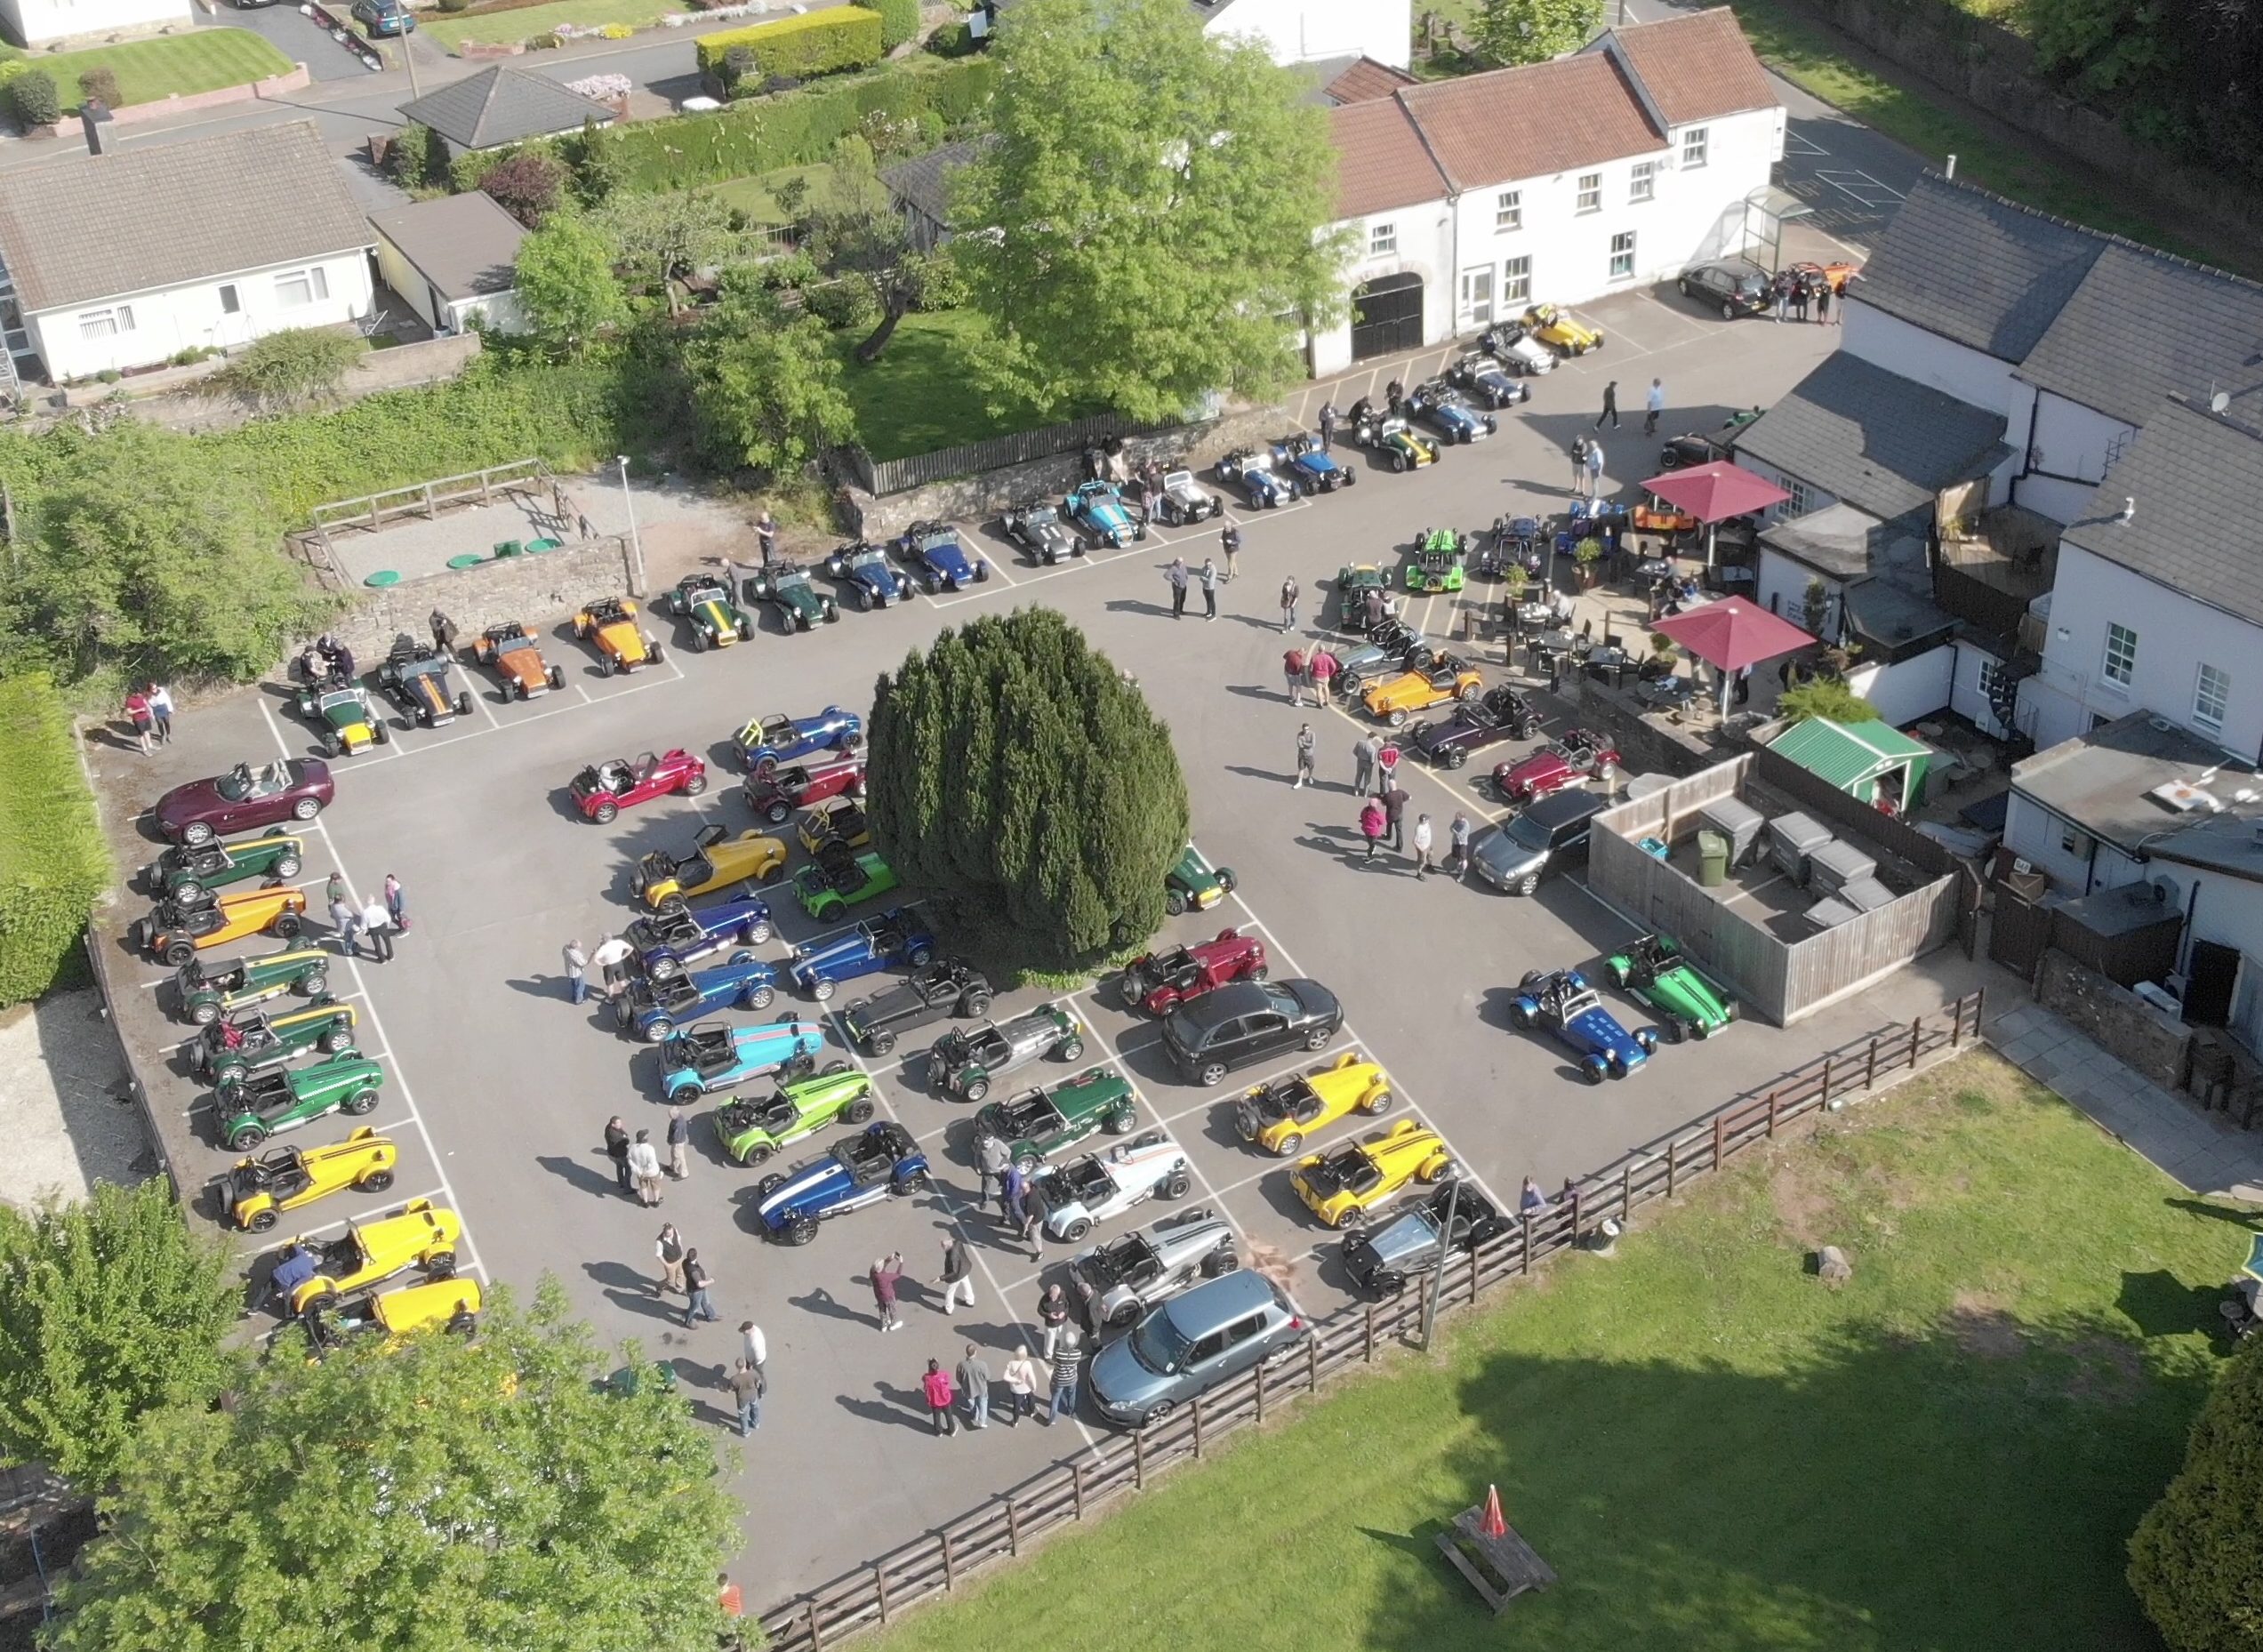 80+ Sevens on the 2018 Taffia Fish and Chip Run – Drone Shot